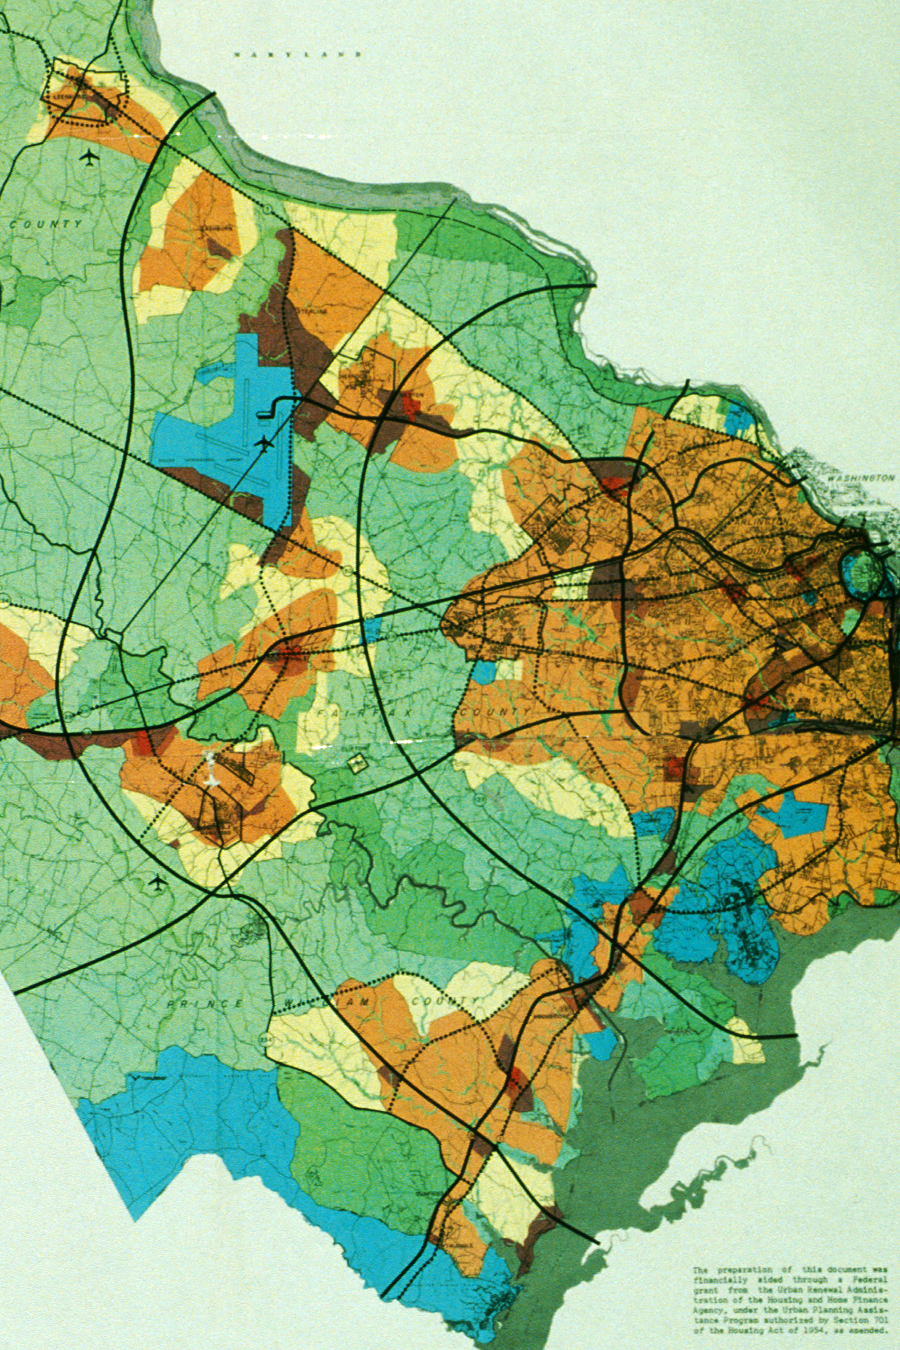 the Northern Virginia Regional Plan for 2000, completed in 1965, envisioned Outer Beltways in Fairfax and Prince William counties